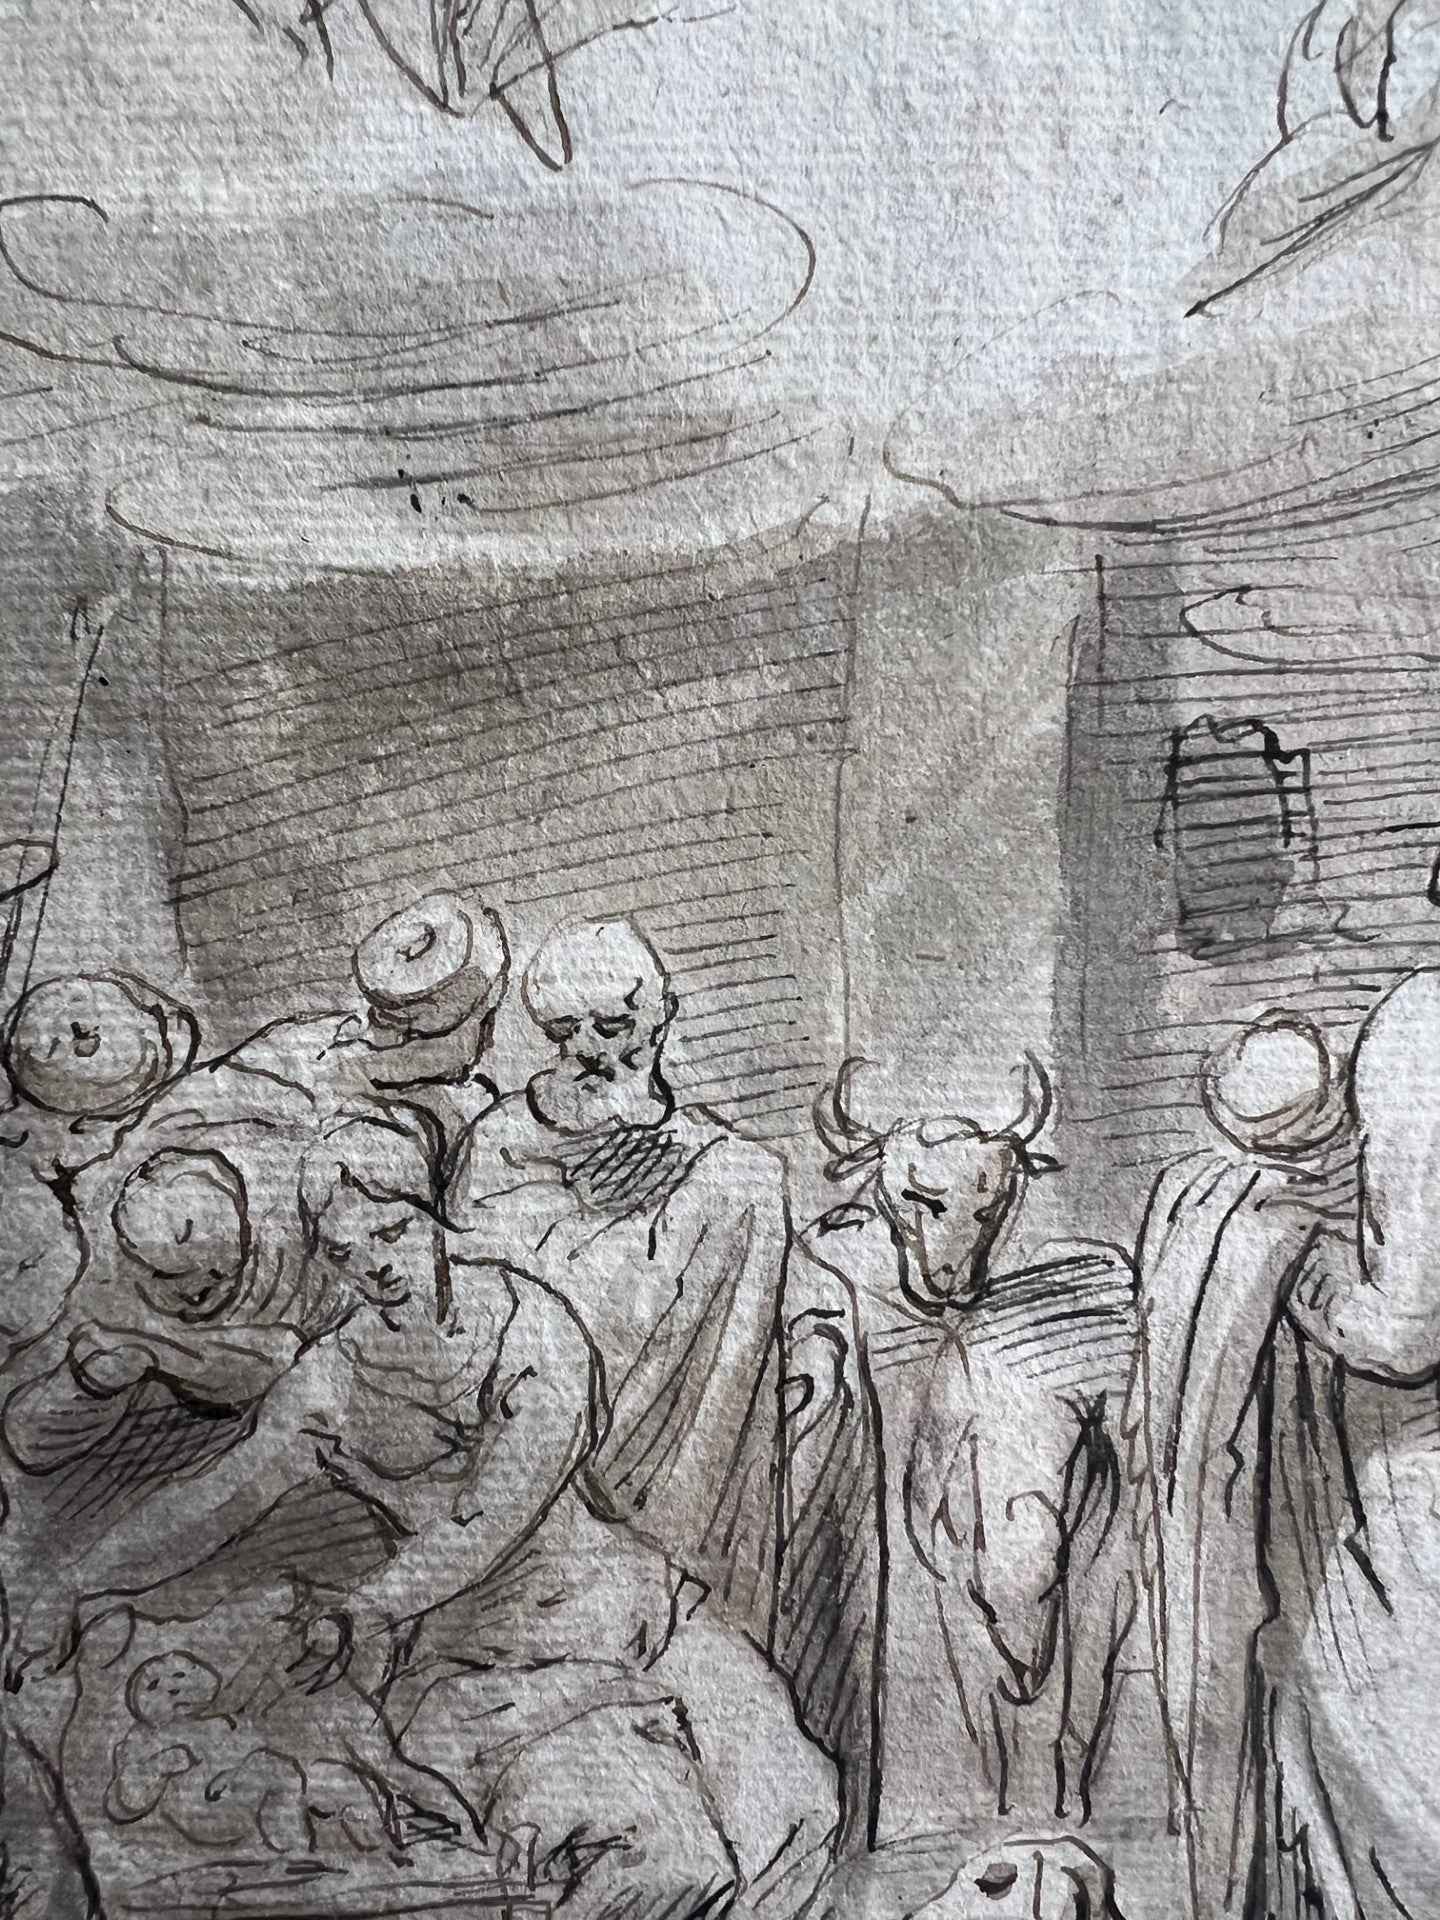 OLD MASTER DRAWING "BIBLICAL" PEN, INK & WASH 17TH CENTURY "ADORATION OF THE SHEPHERDS"